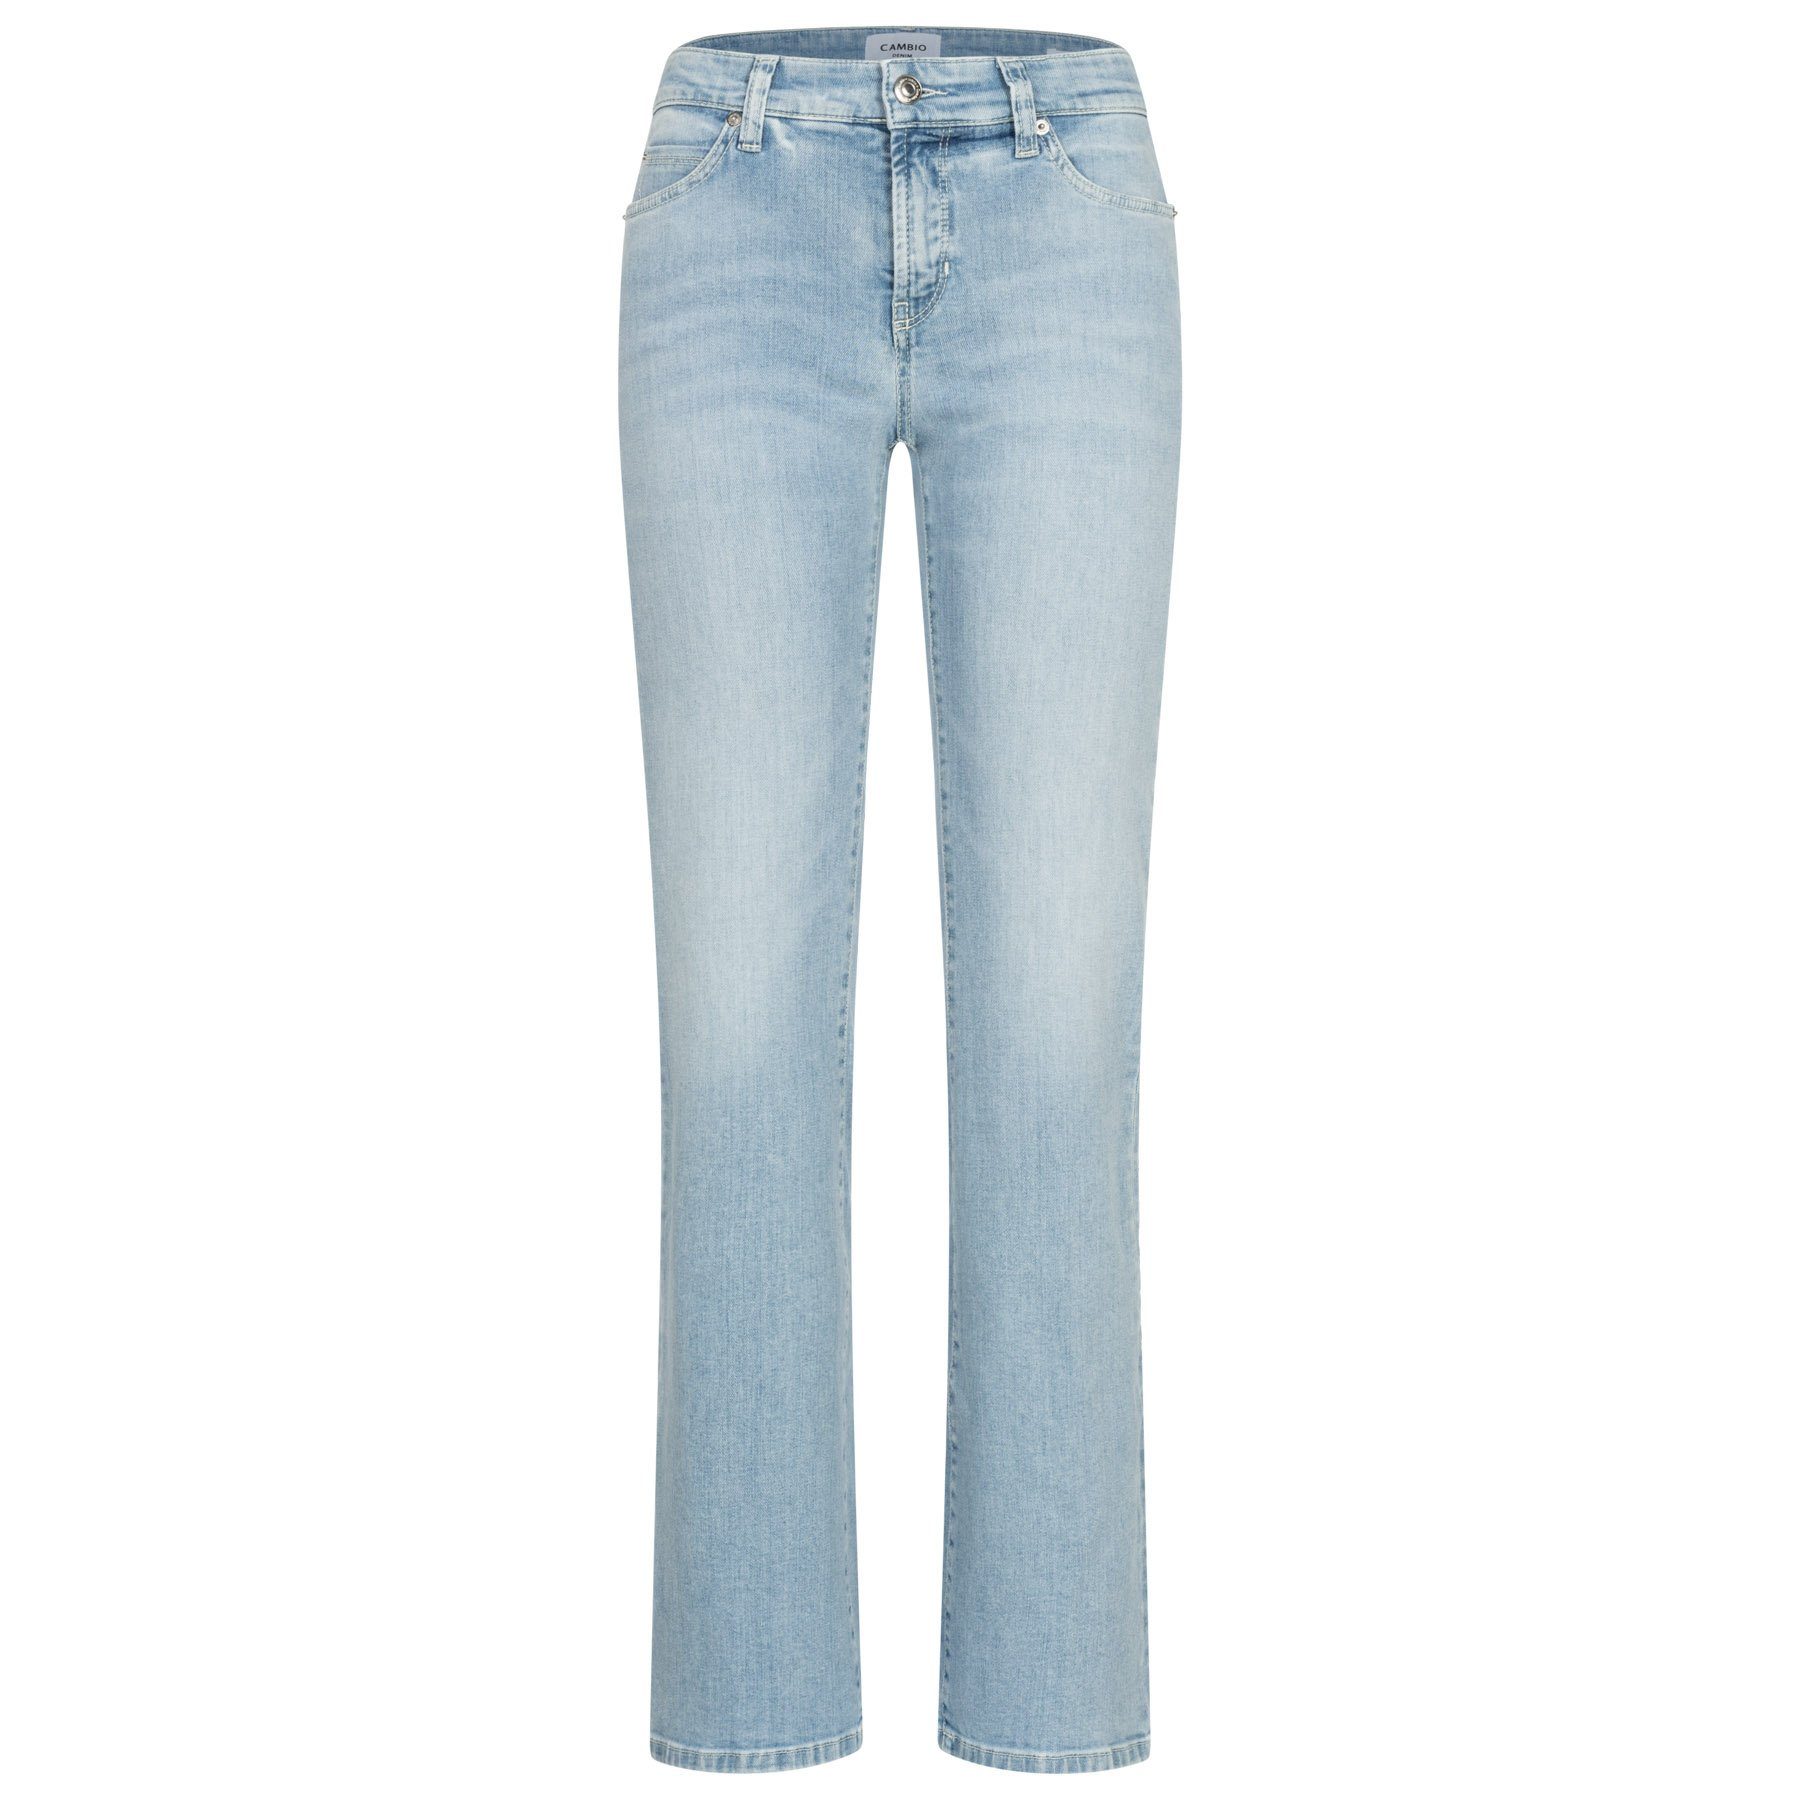 Cambio Low-rise-Jeans Jeans PARIS FLARED Mid Waist